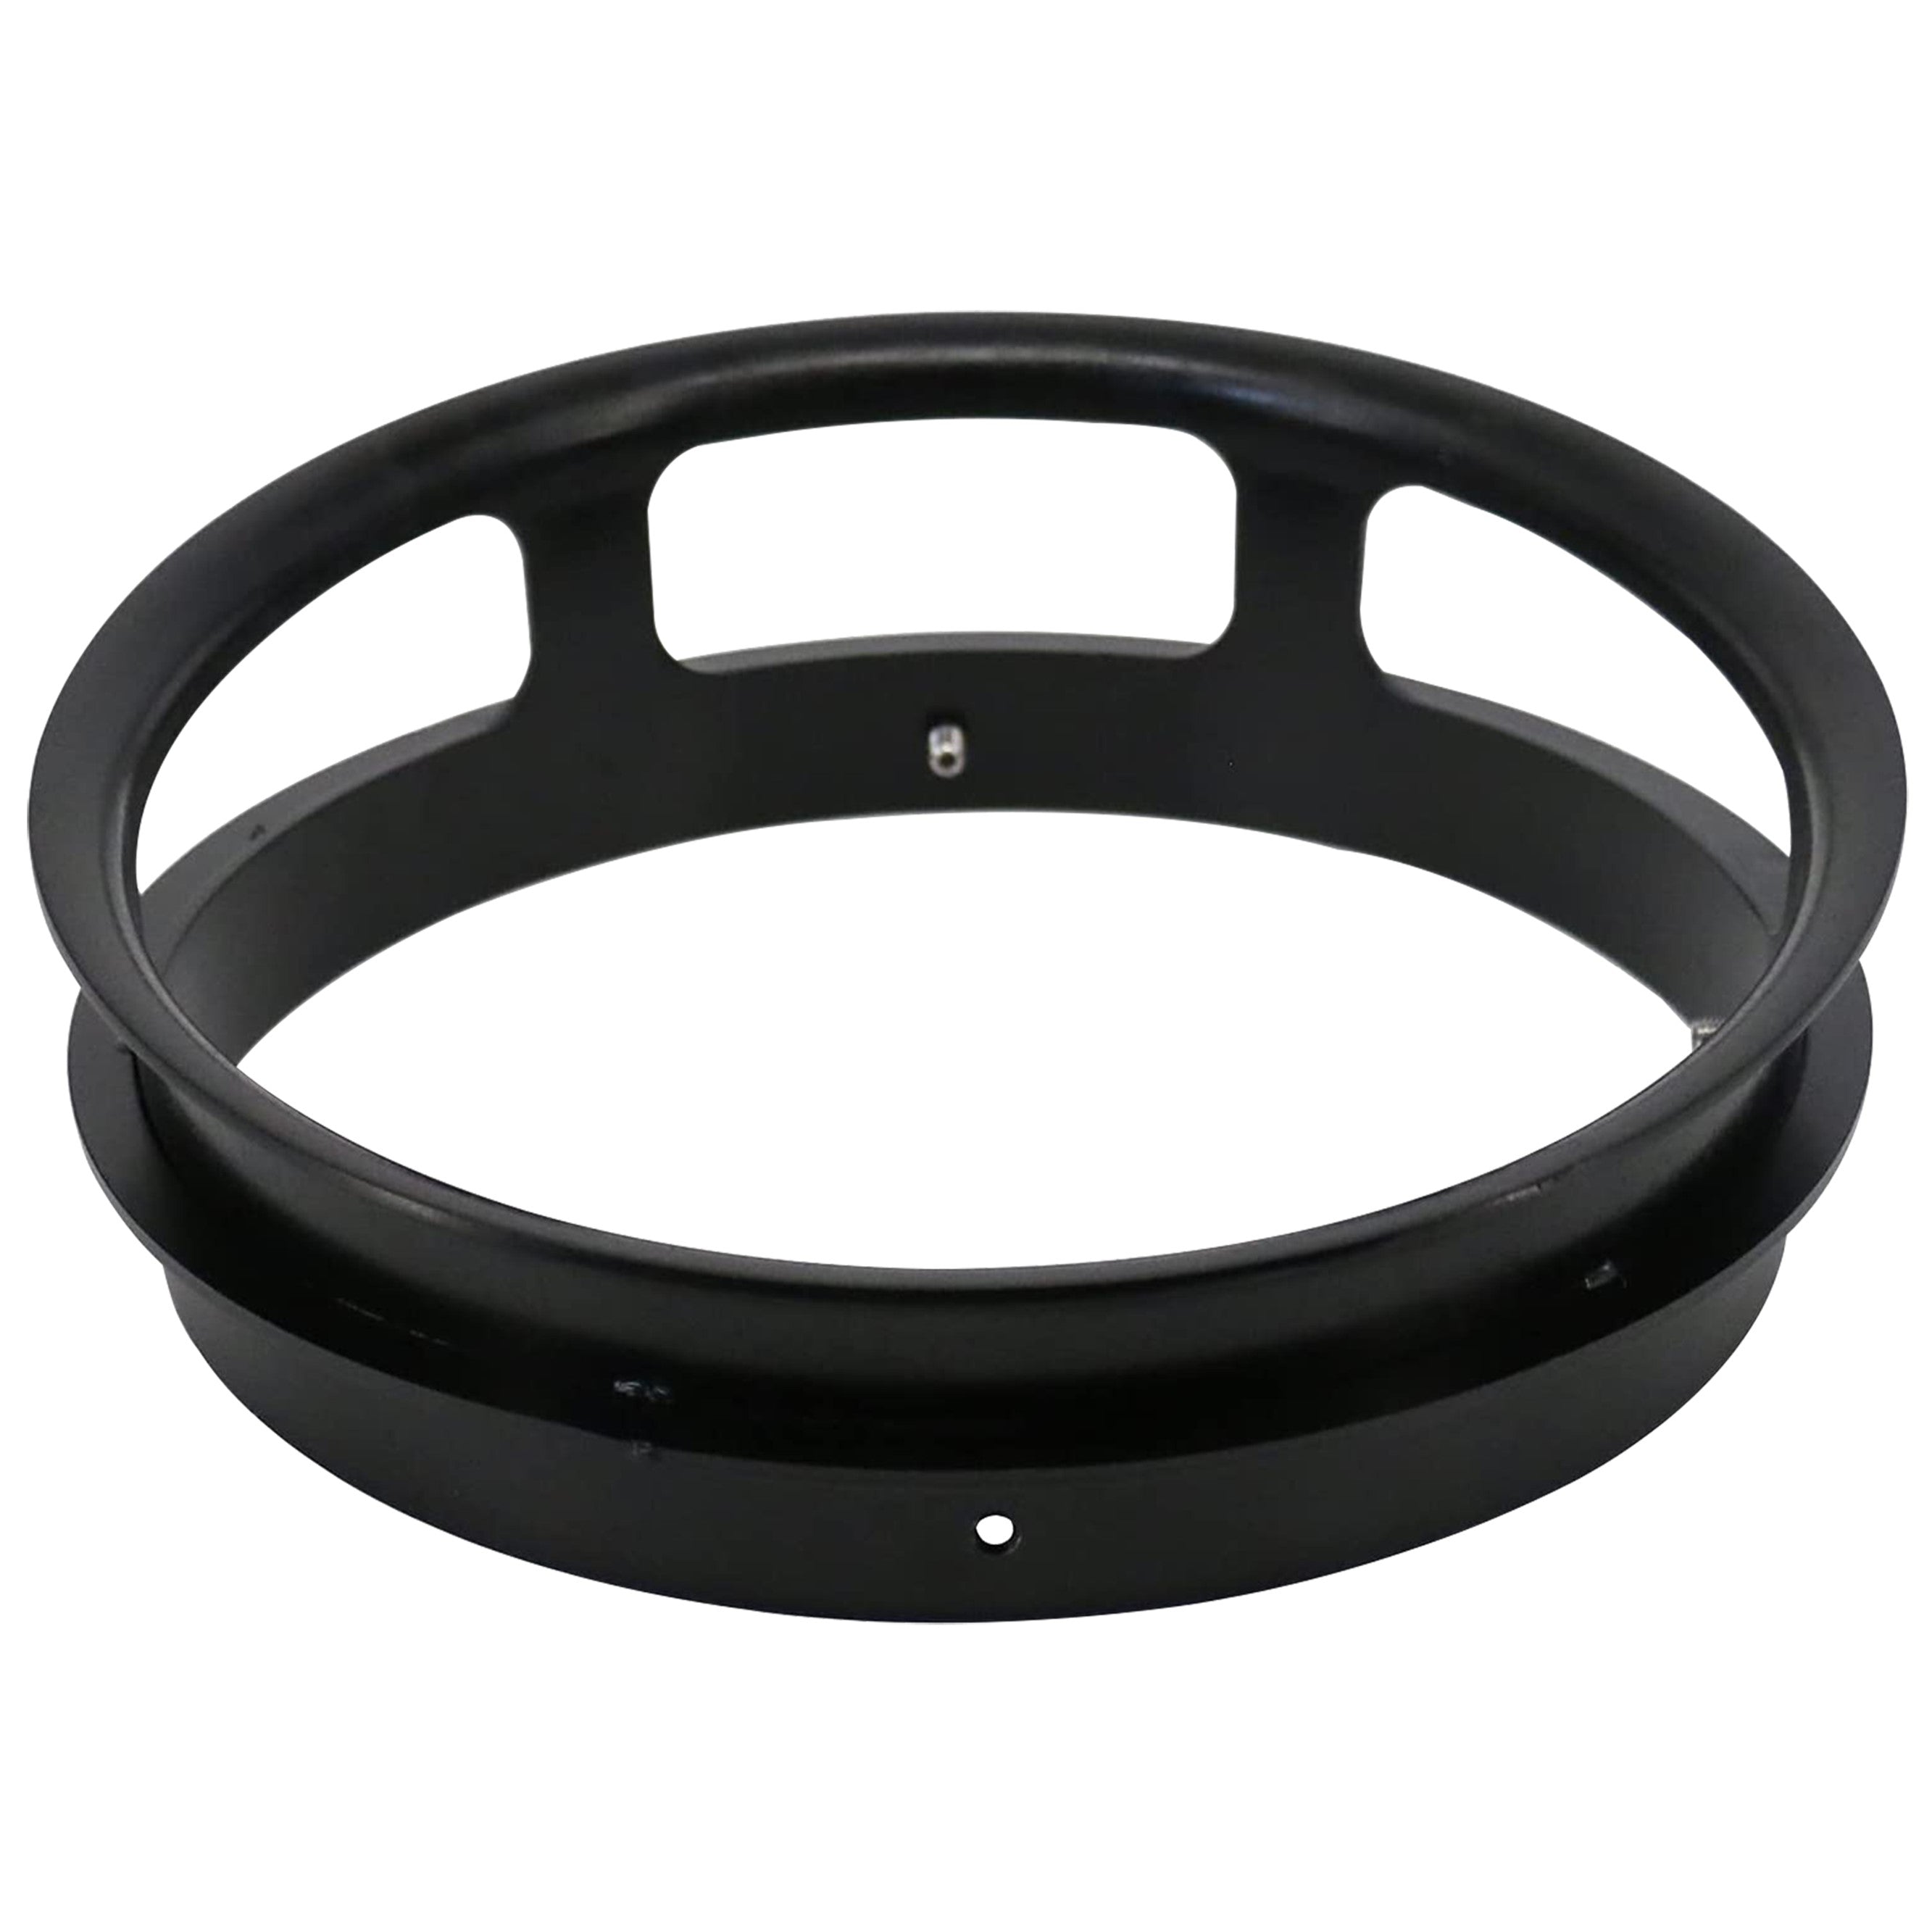 Leyso 16” Diameter 3 Opening Steel Rim to Replace the Worn Out Wok Ring for Chinese Wok Range